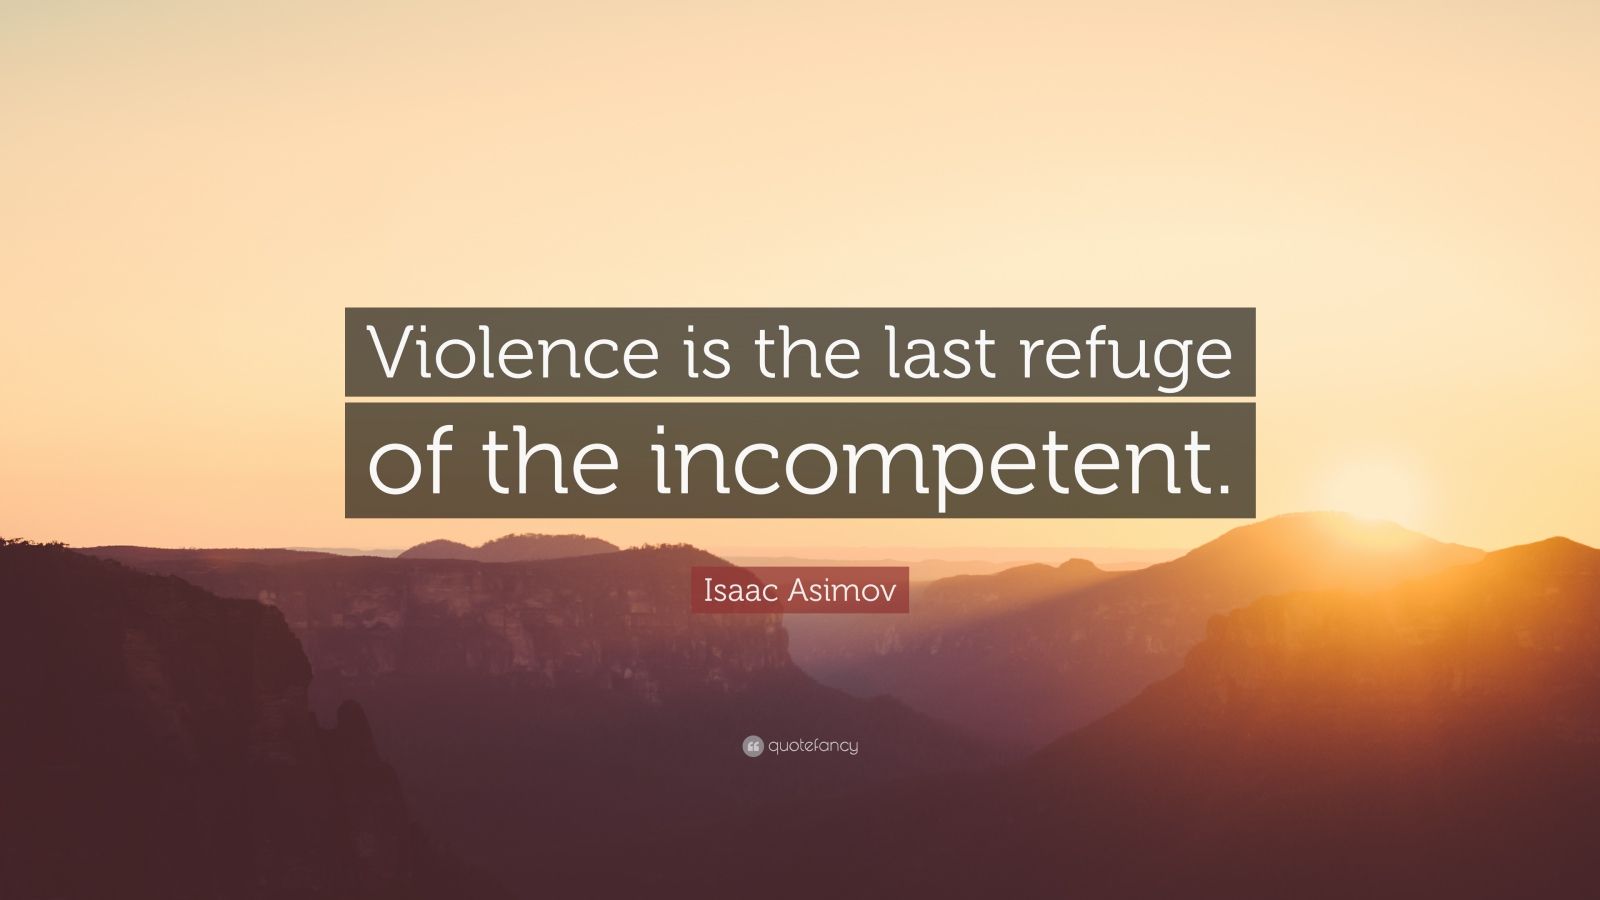 essay on violence is the last refuge of the incompetent